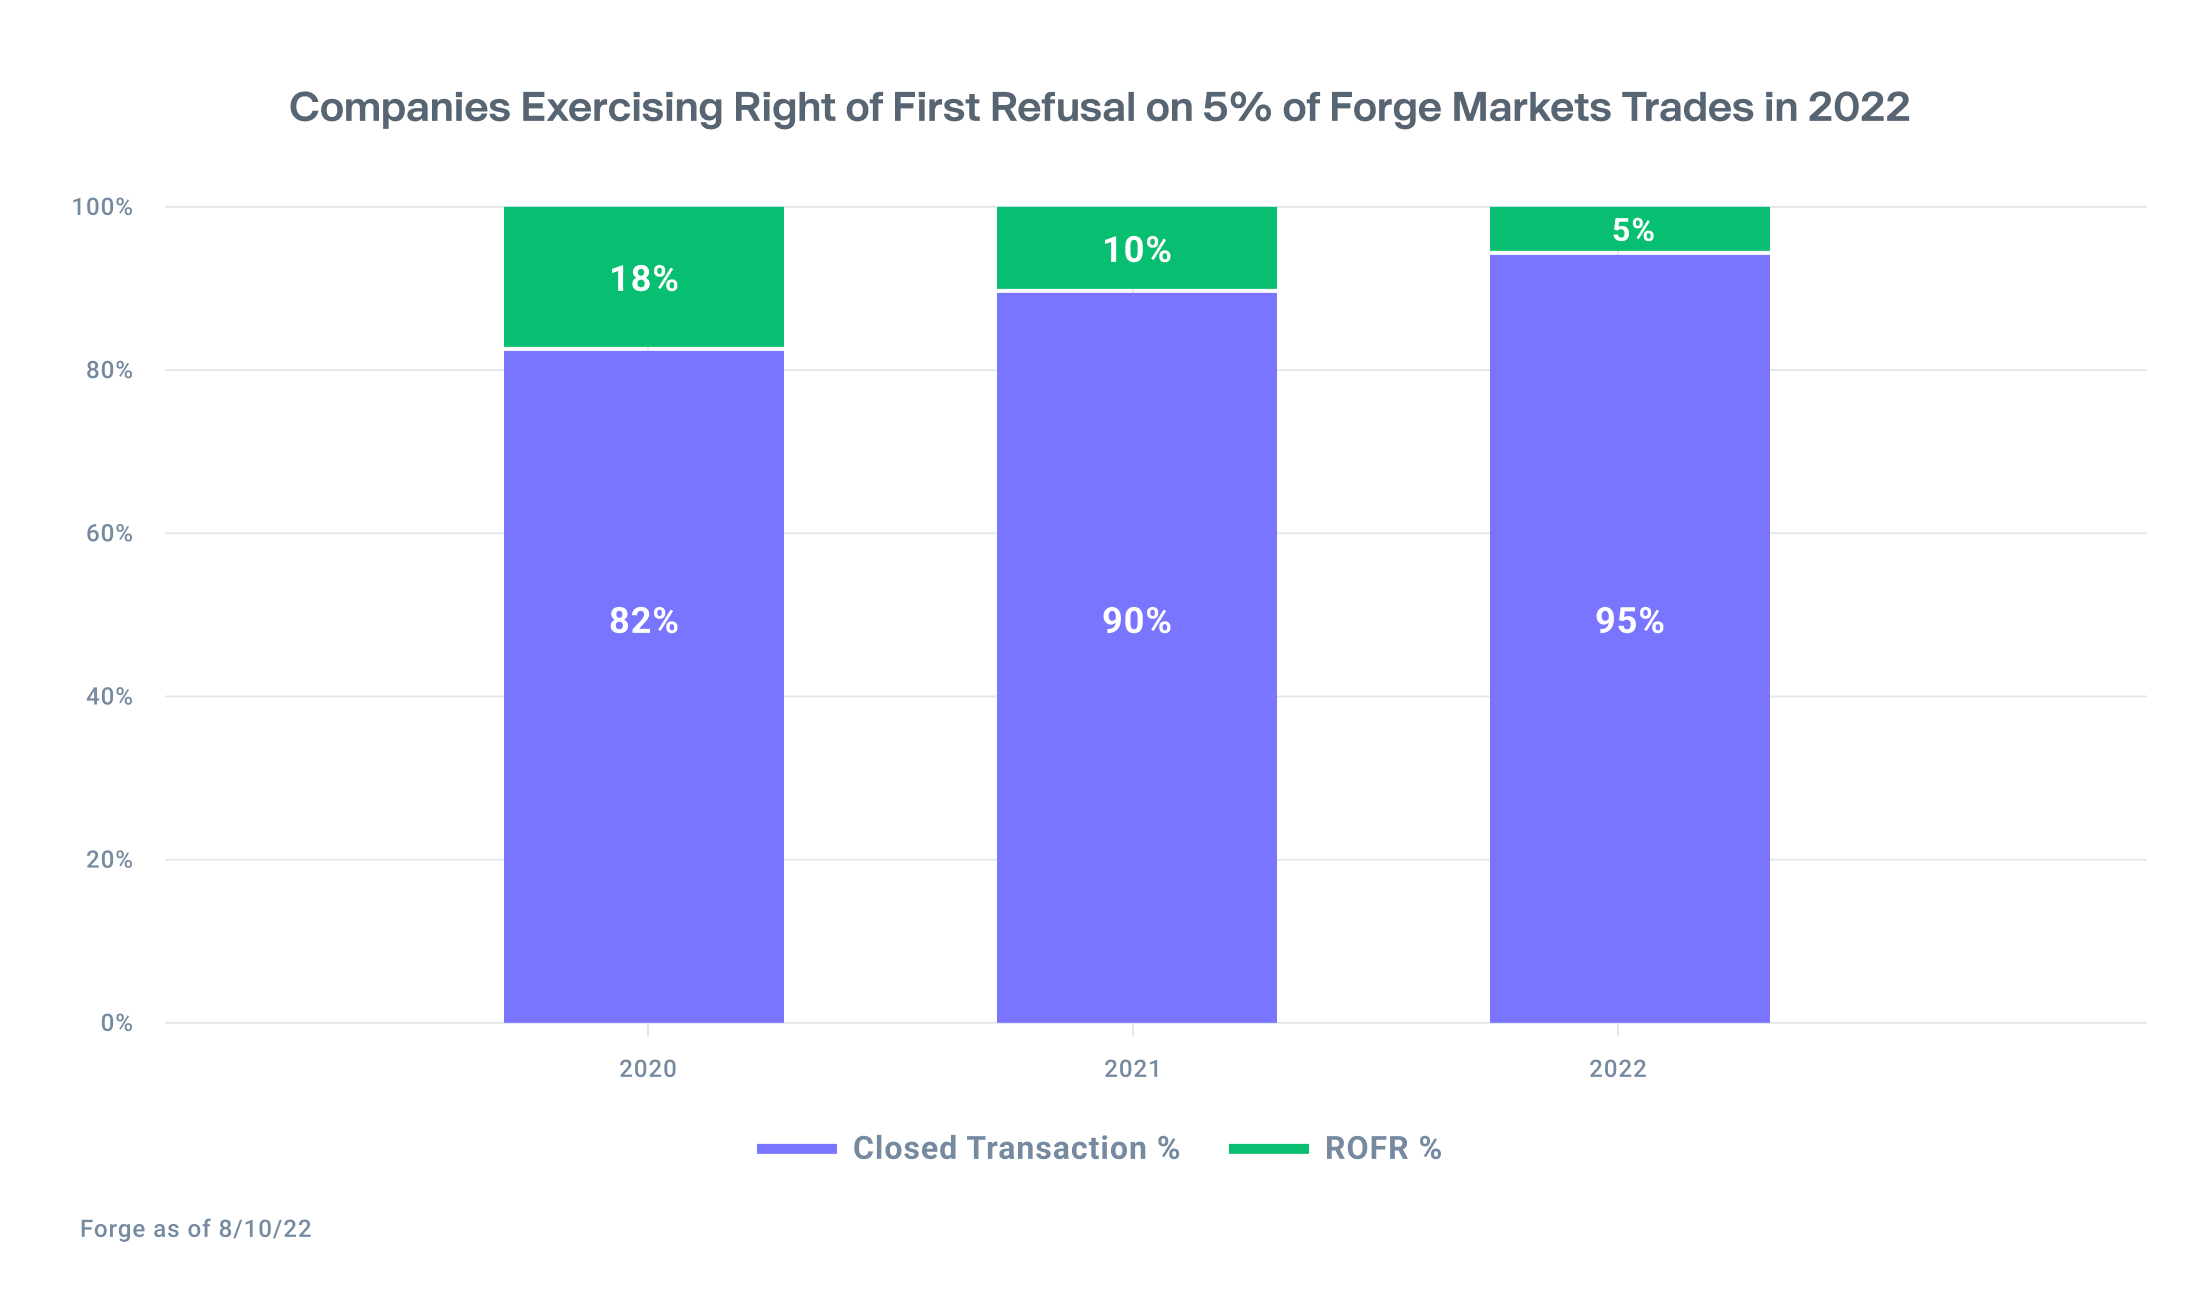 Bar chart shows ROFR rates decreasing from 18% in 2019 to 5% in 2022 on Forge Markets